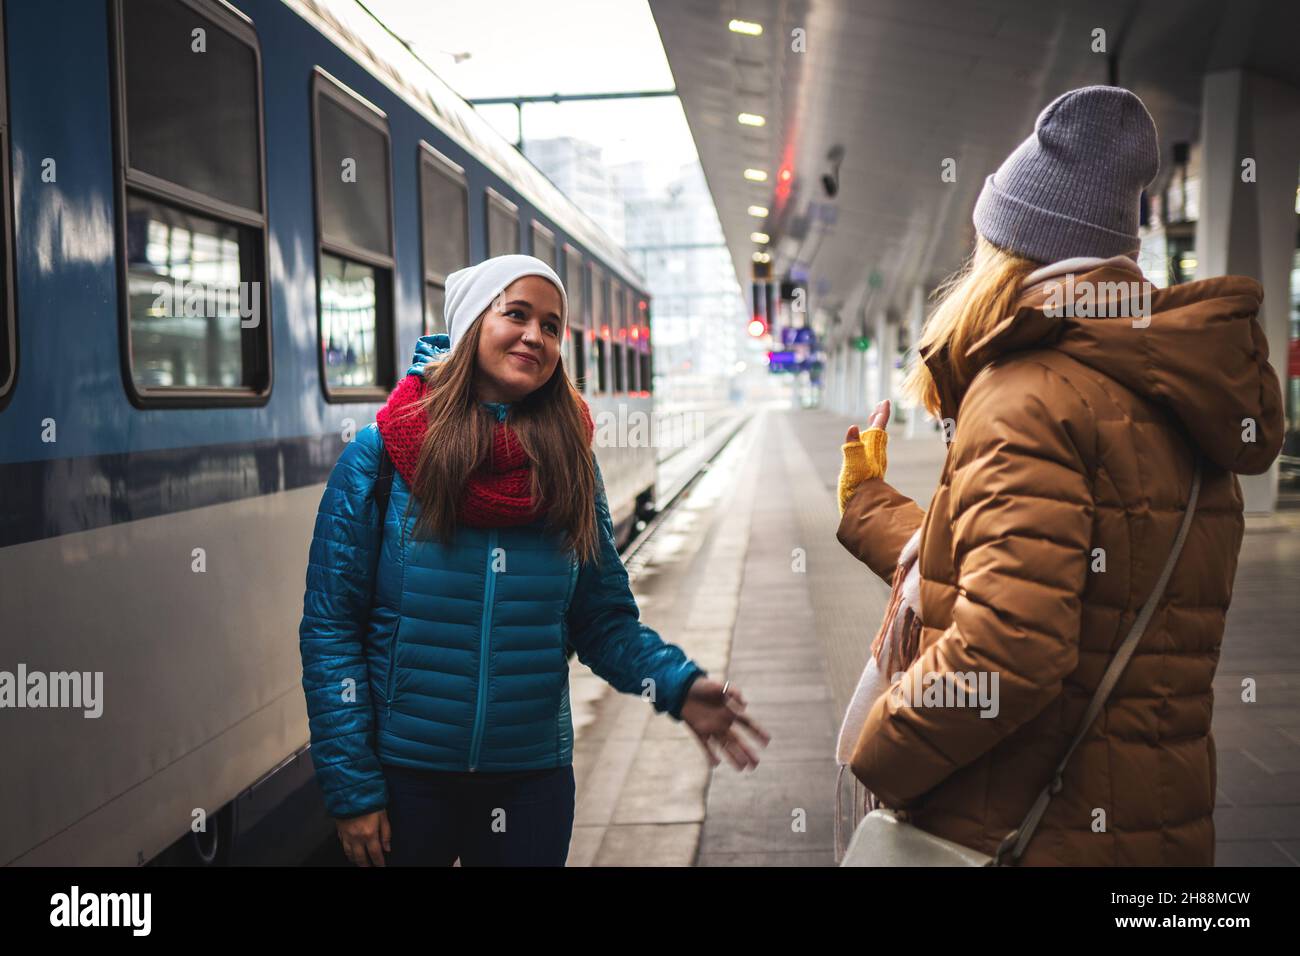 I miss you already! Two women friends say goodbye at the train station before travel. Travel concept with two persons. Railway transportation Stock Photo